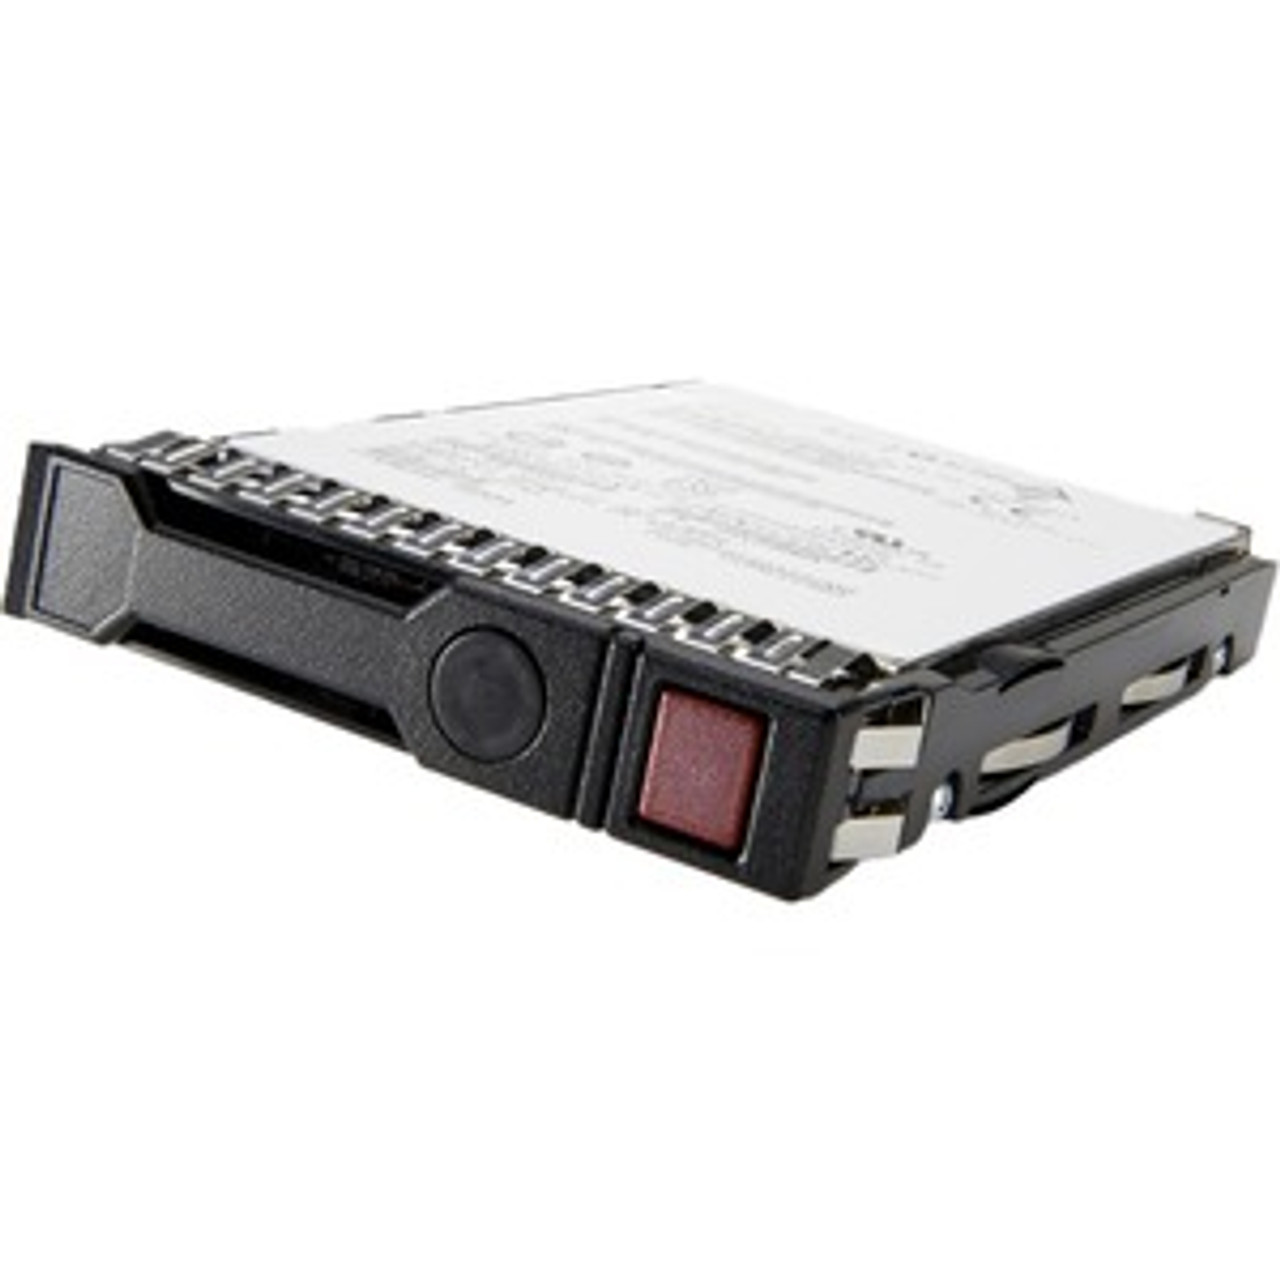 P26354-K21 HPE 1.6TB SAS 12Gbps Mixed Use 2.5-inch Internal Solid State Drive (SSD)